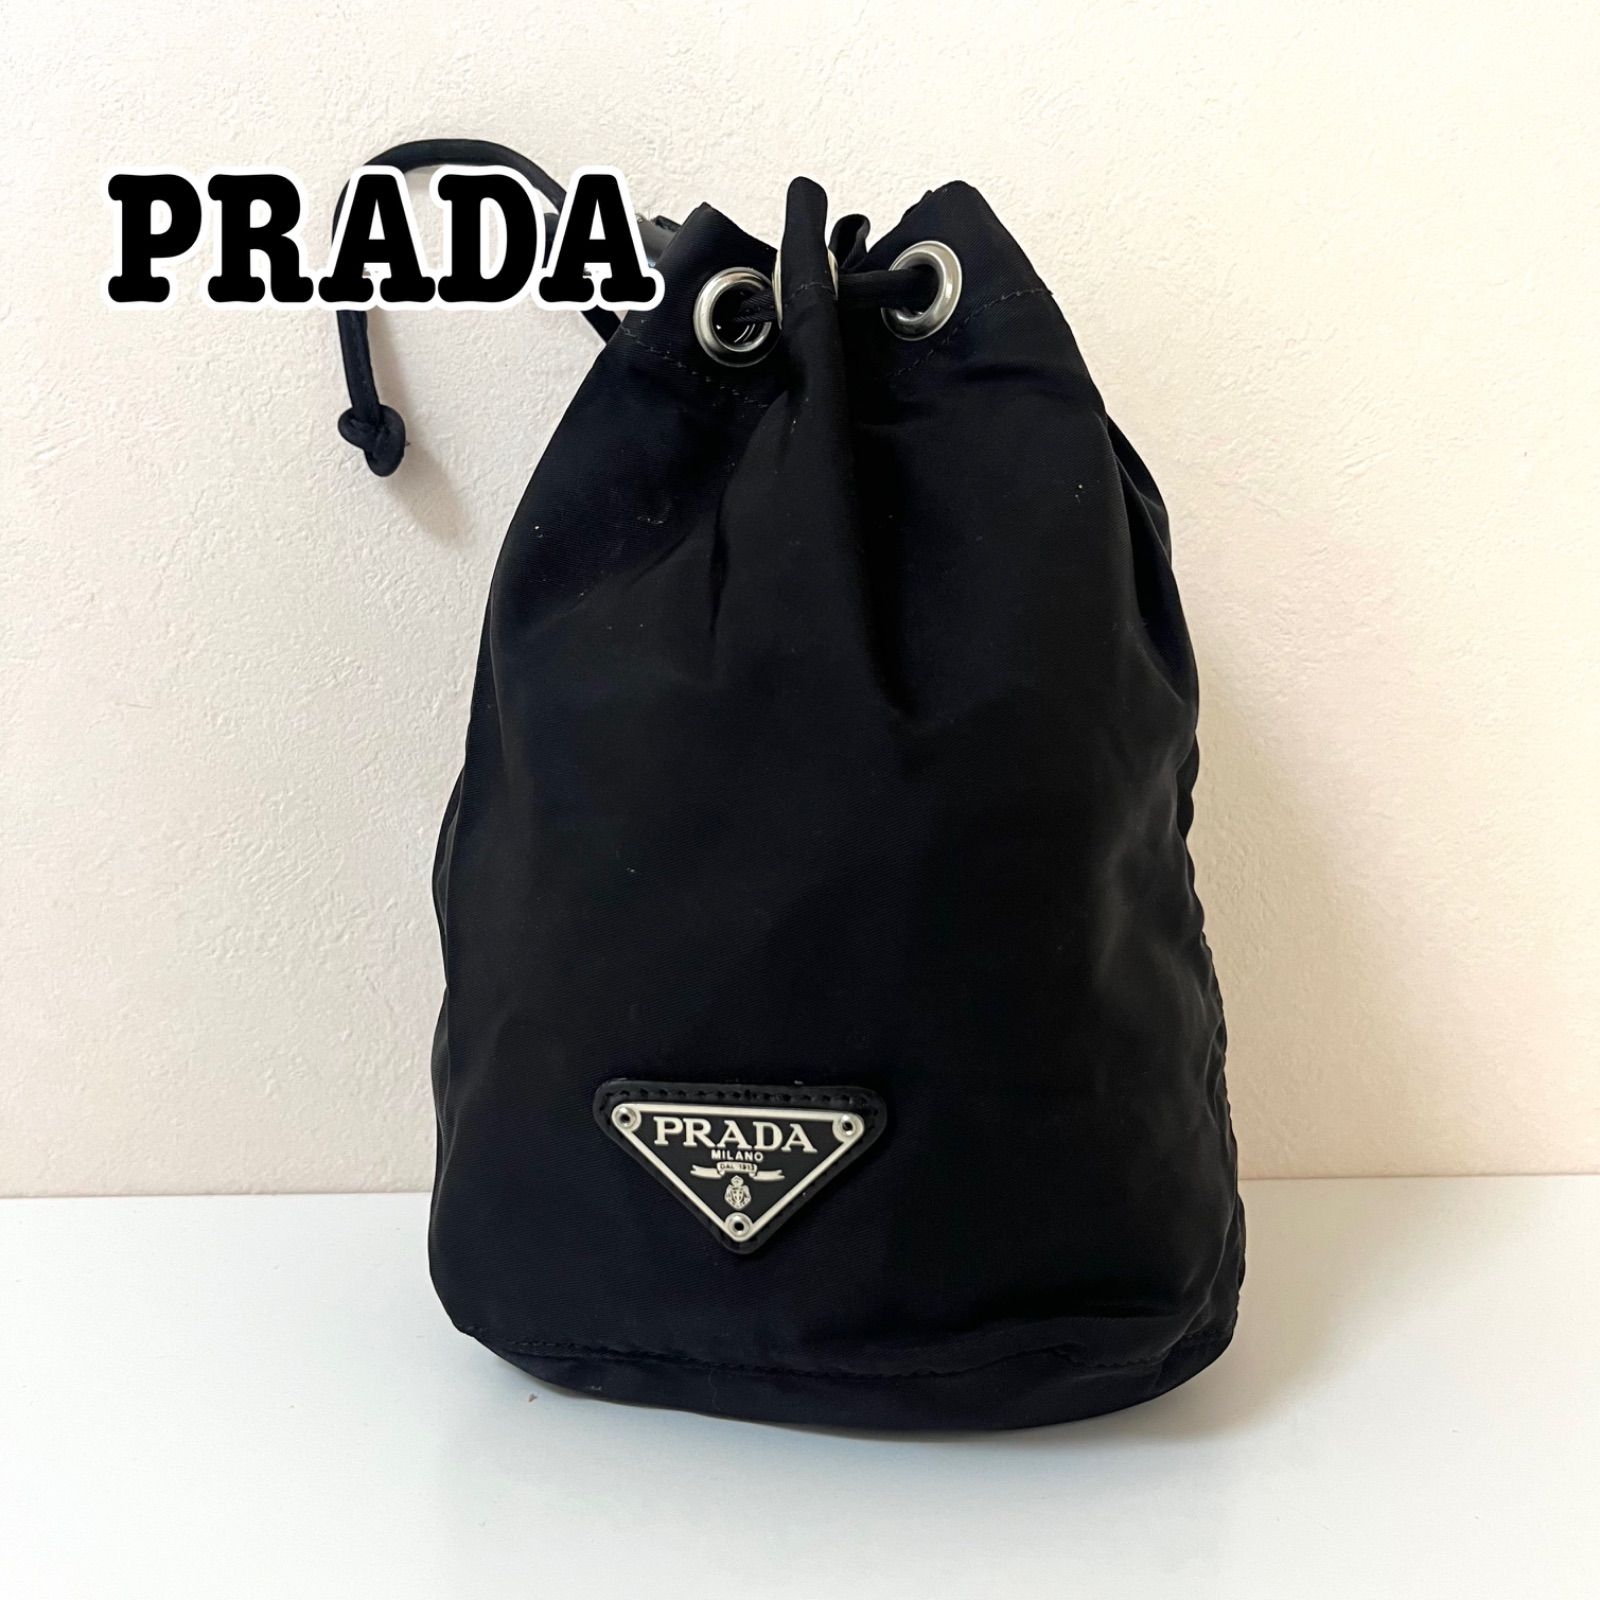 PRADA ナイロン巾着バッグ | www.agb.md